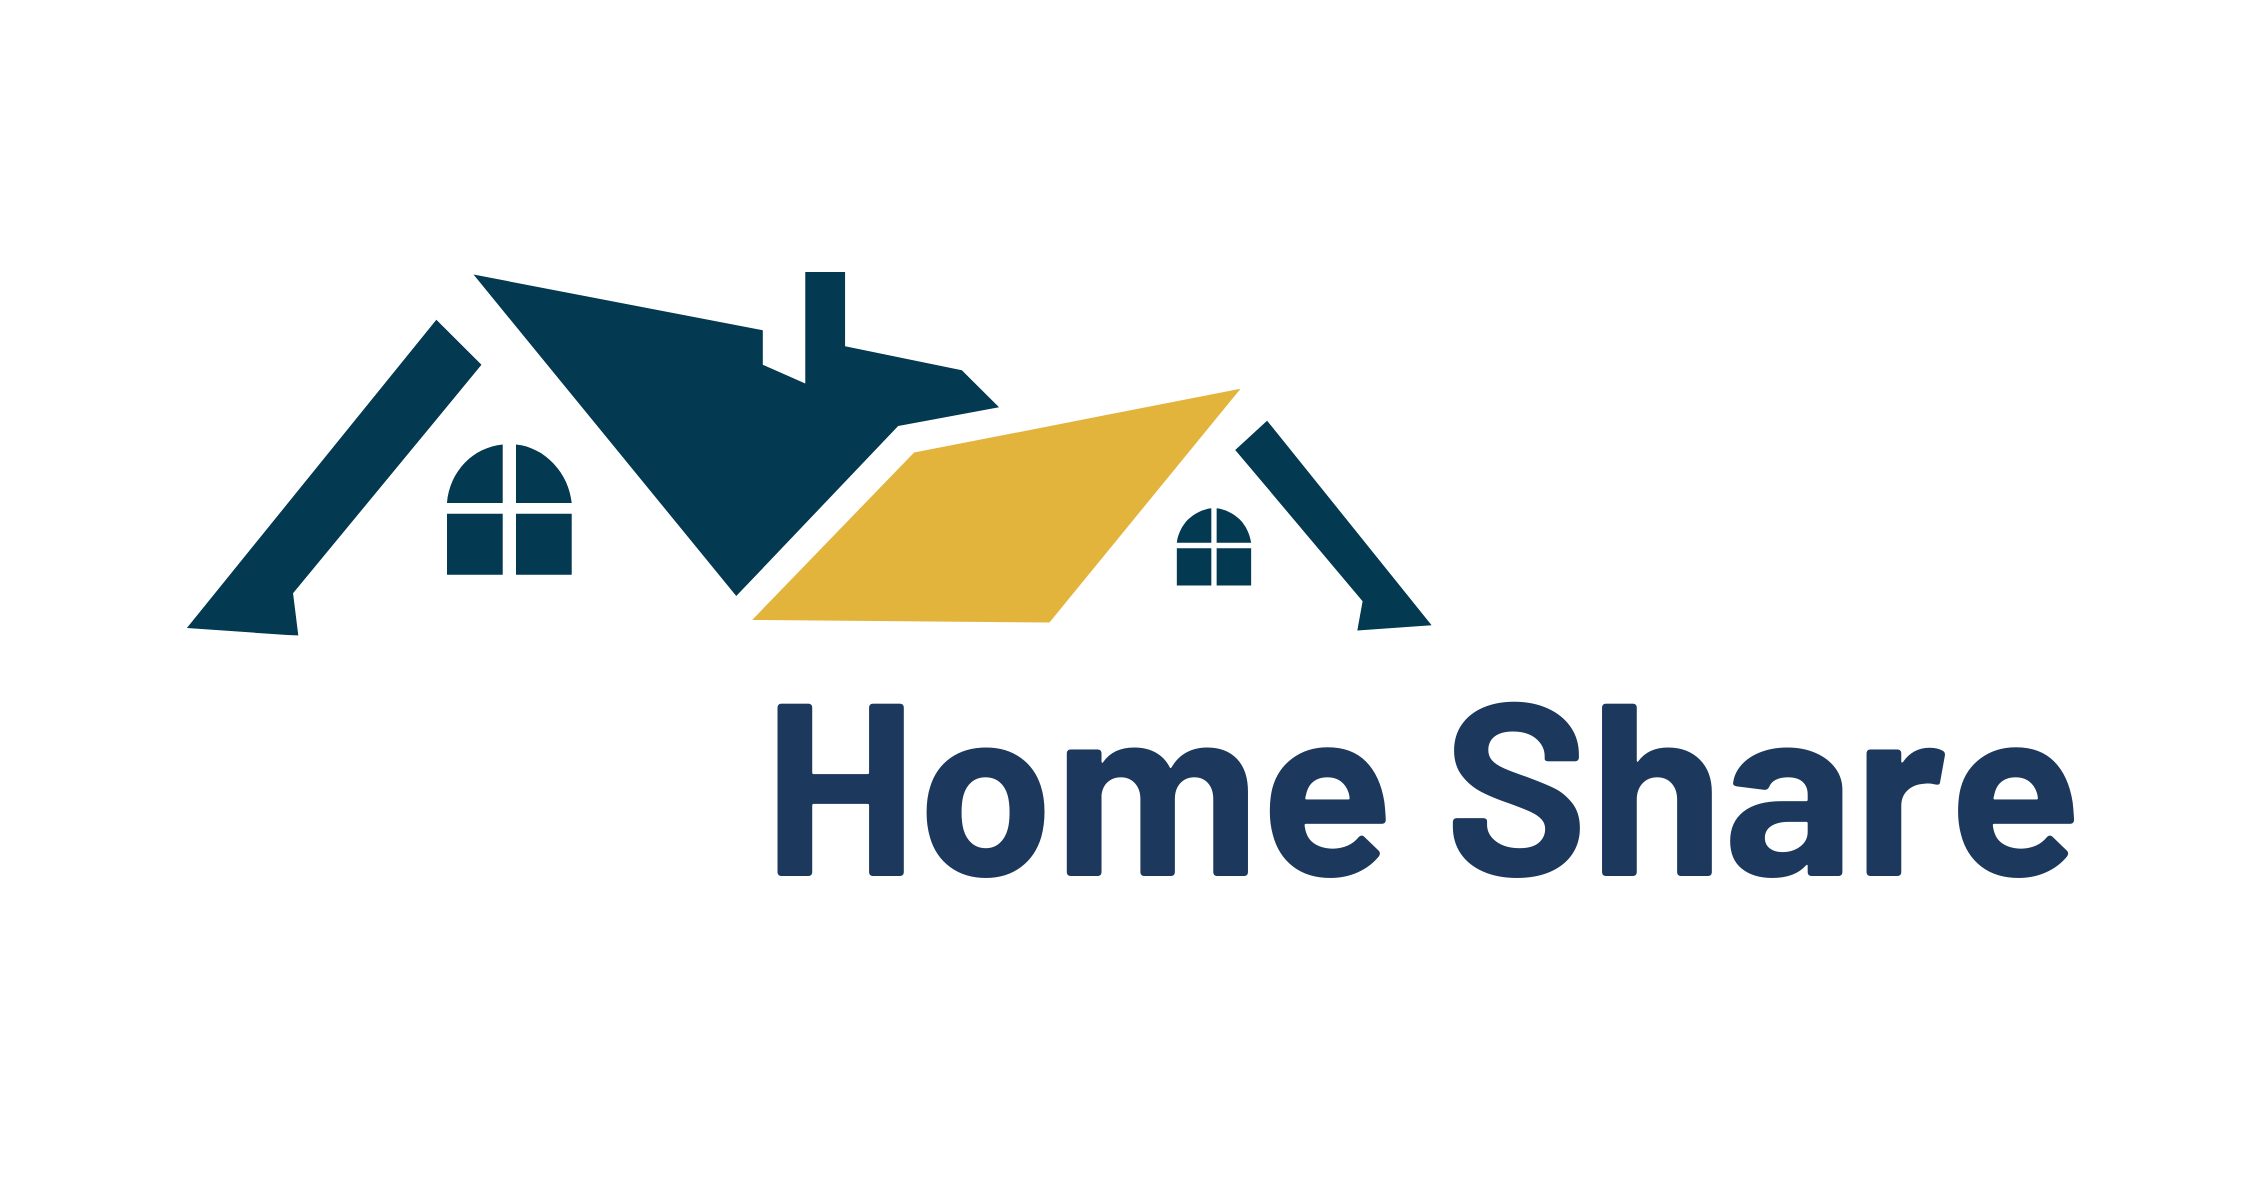 The Home Share